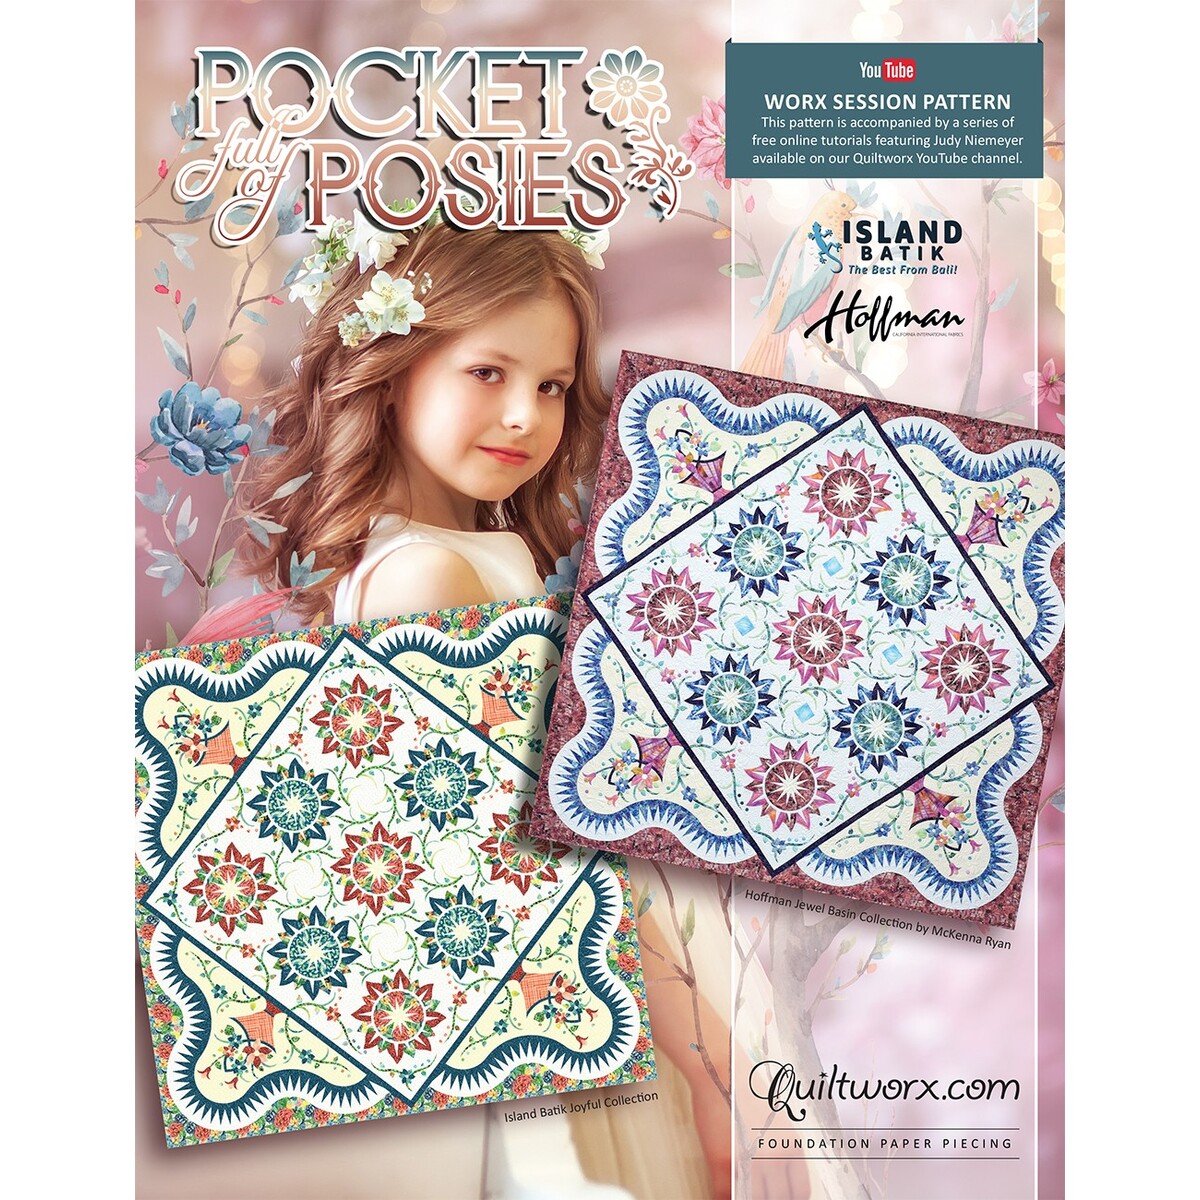 Foundation Paper Piecing Kit - May